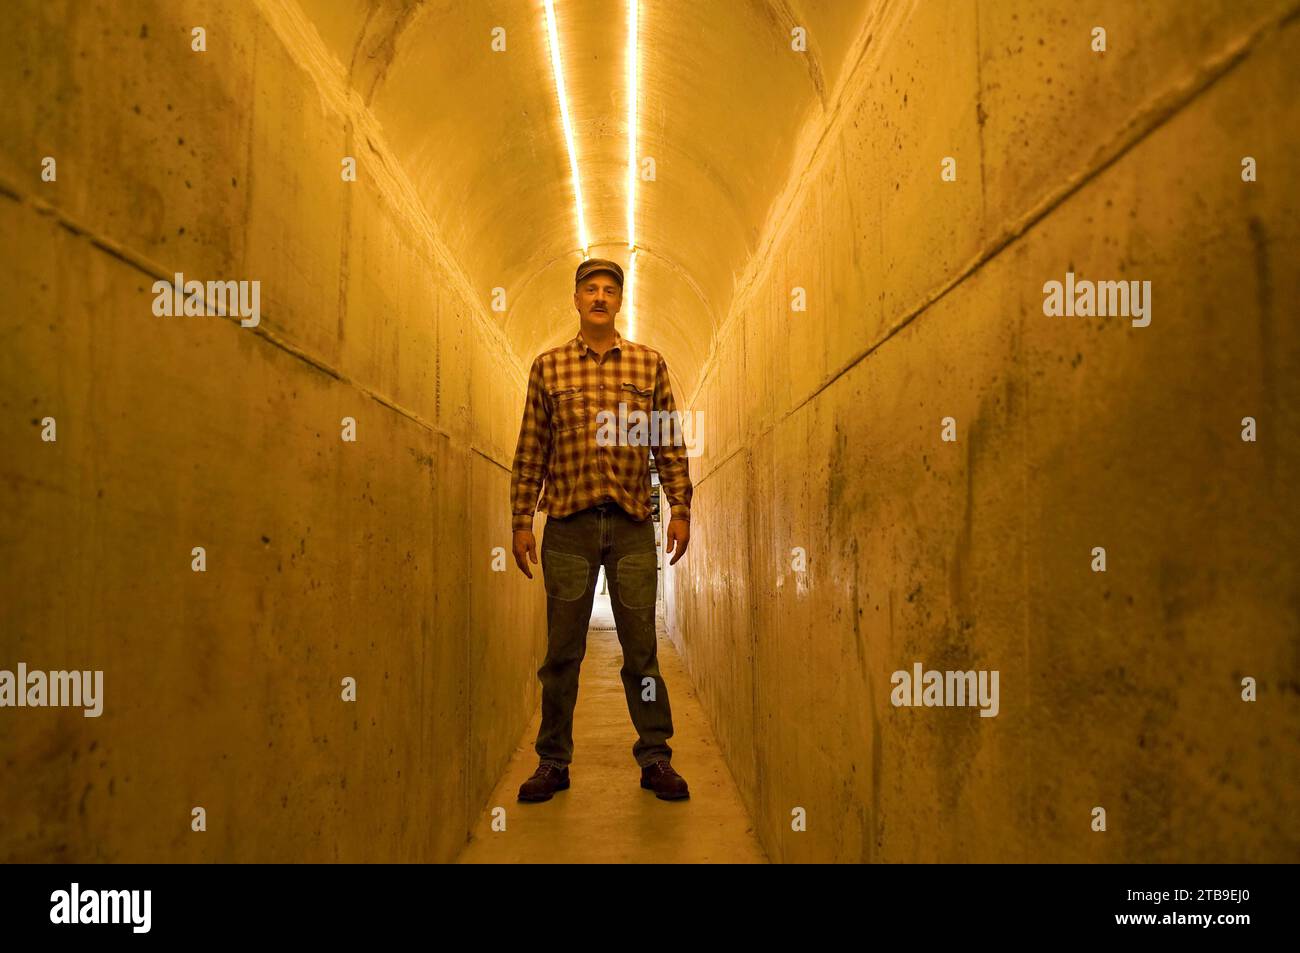 Man stands in a tunnel illuminated with light; Lincoln, Nebraska, United States of America Stock Photo